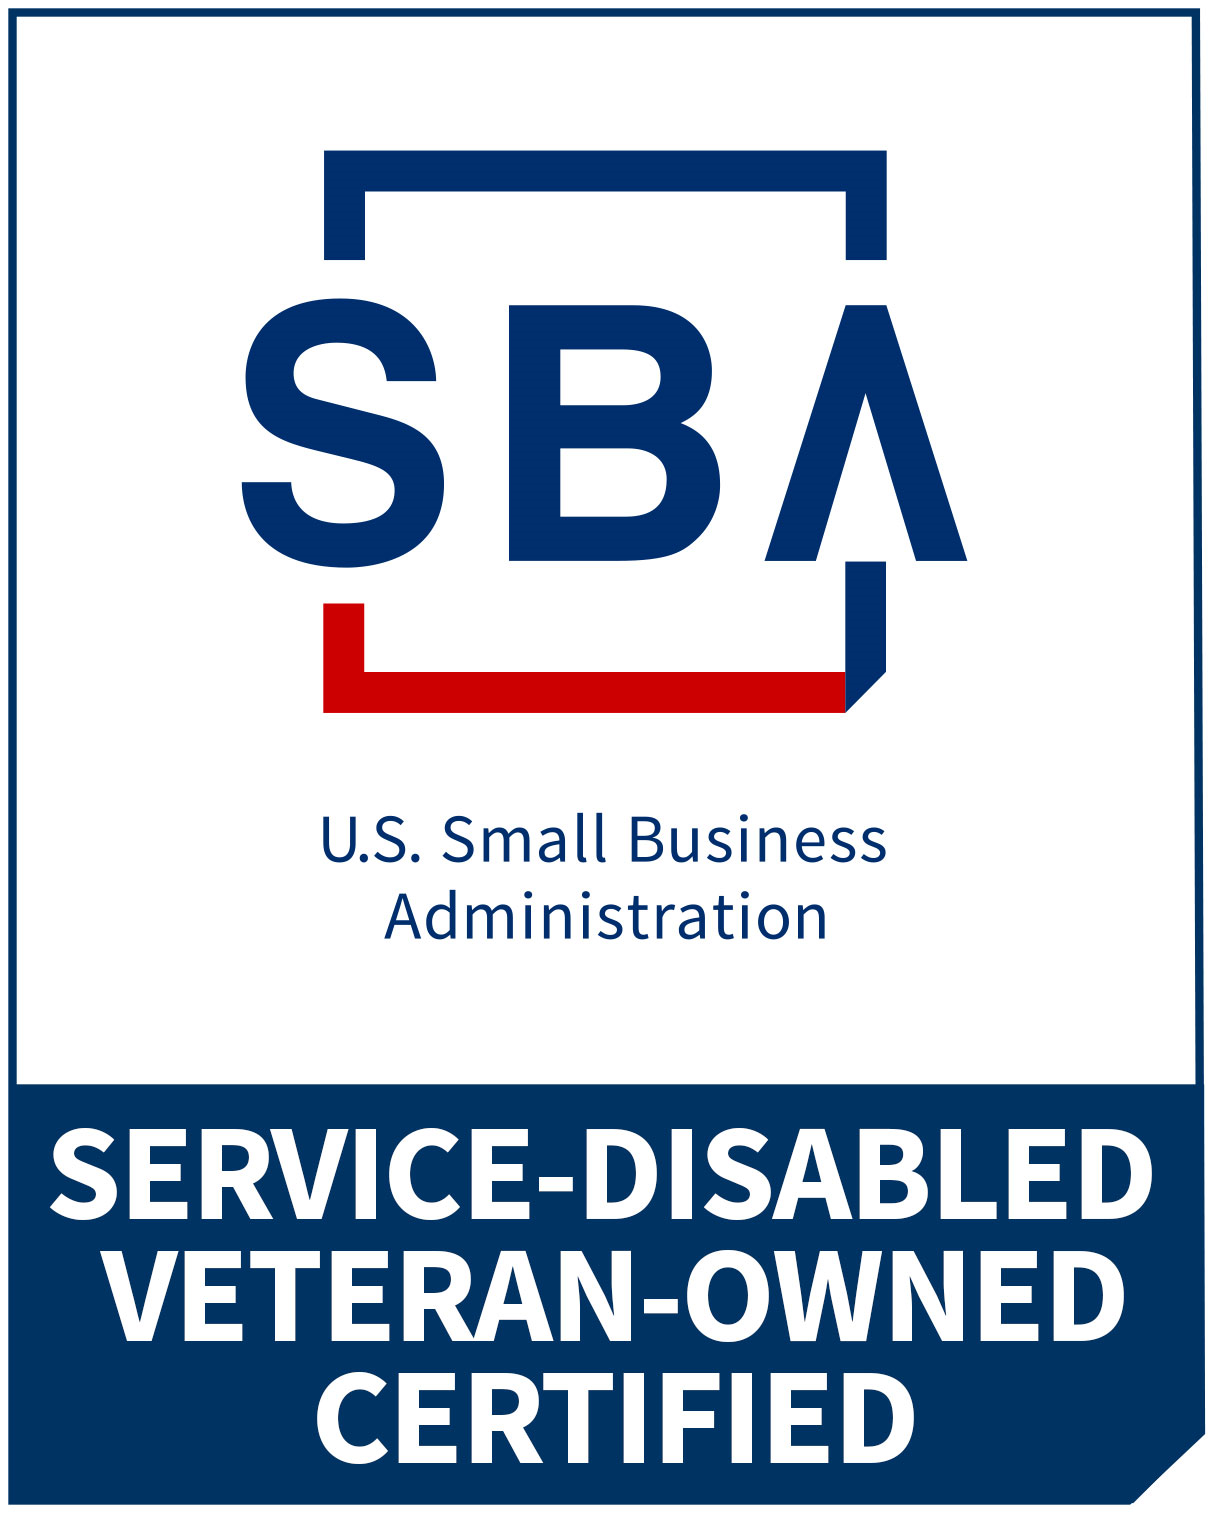 Service-Disable Veteran-Owned Certified Small Business Logo